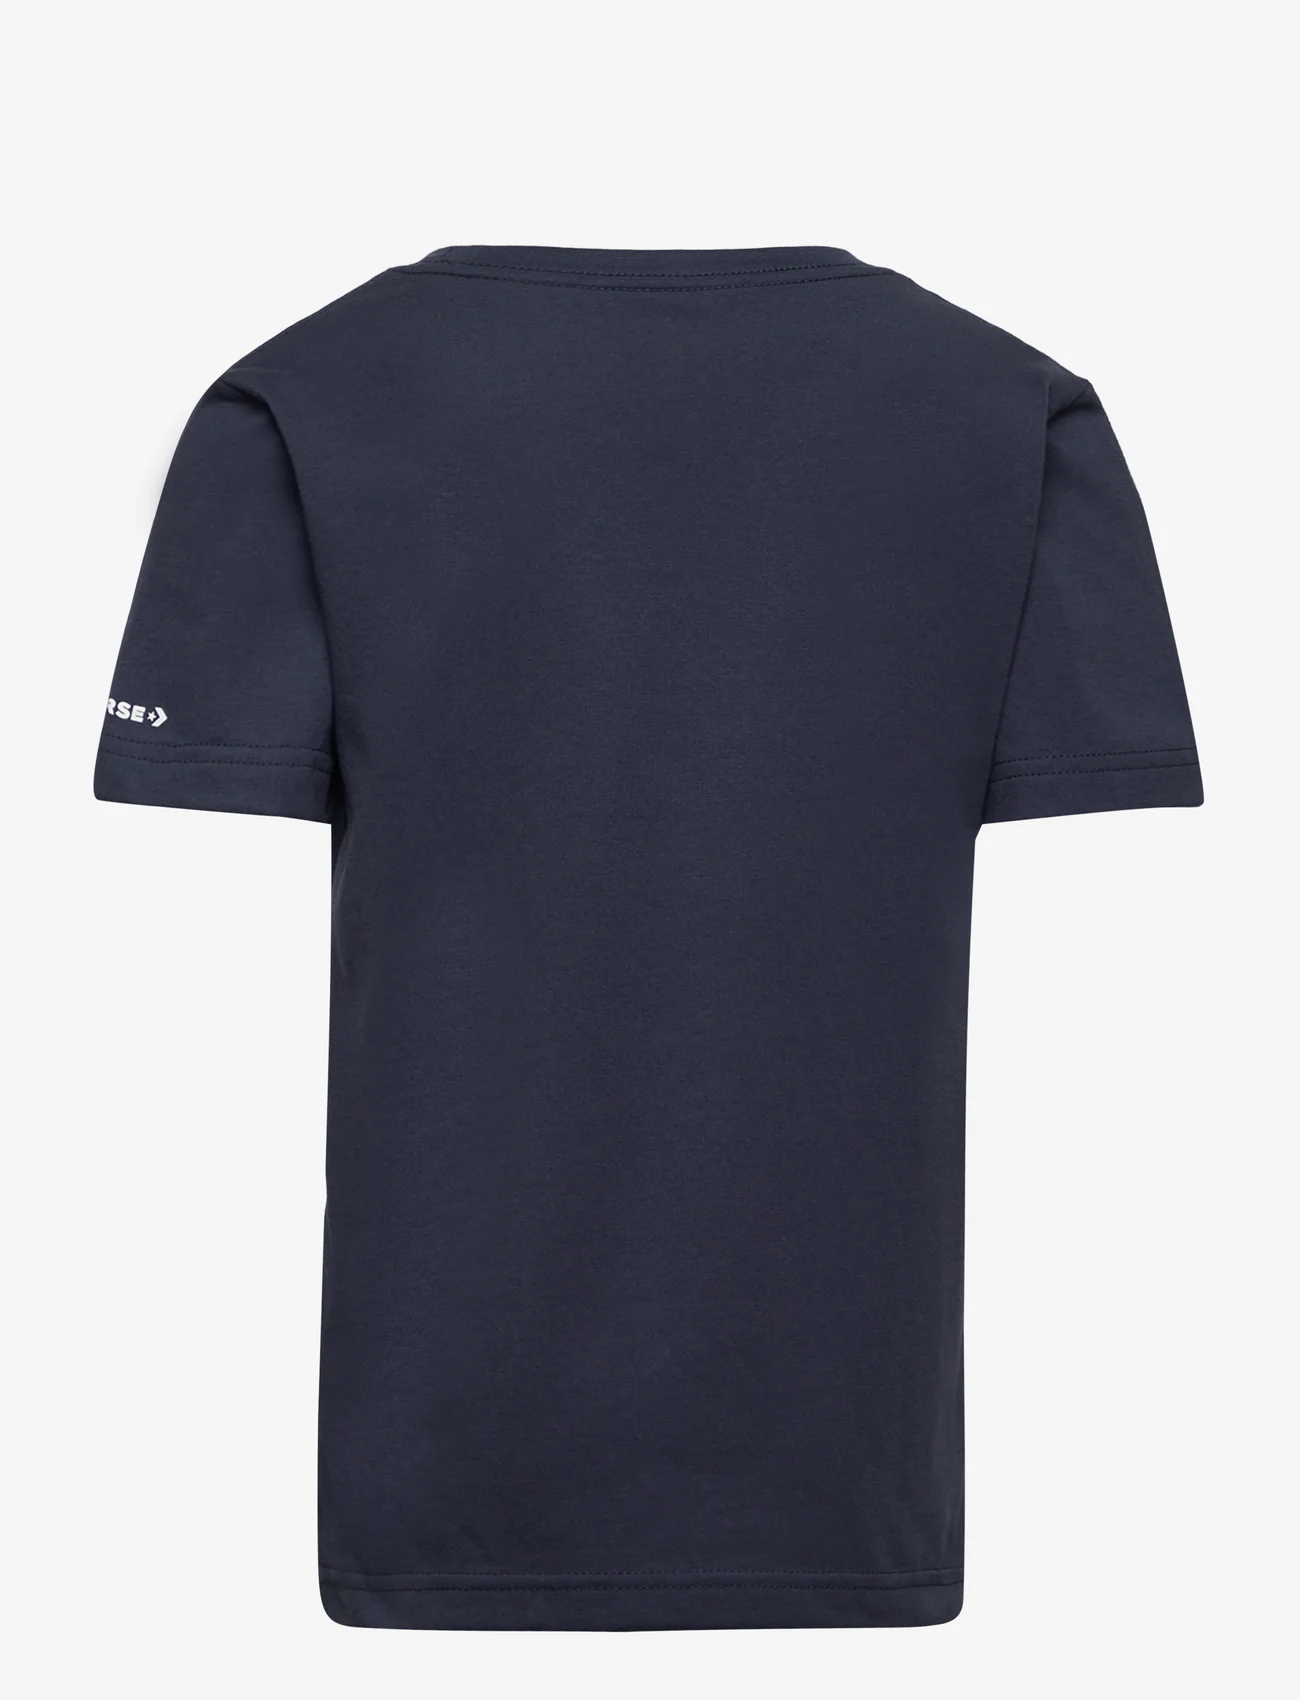 Converse - DISSECTED CTP 1 COLOR TEE - kortærmede t-shirts - converse navy - 1